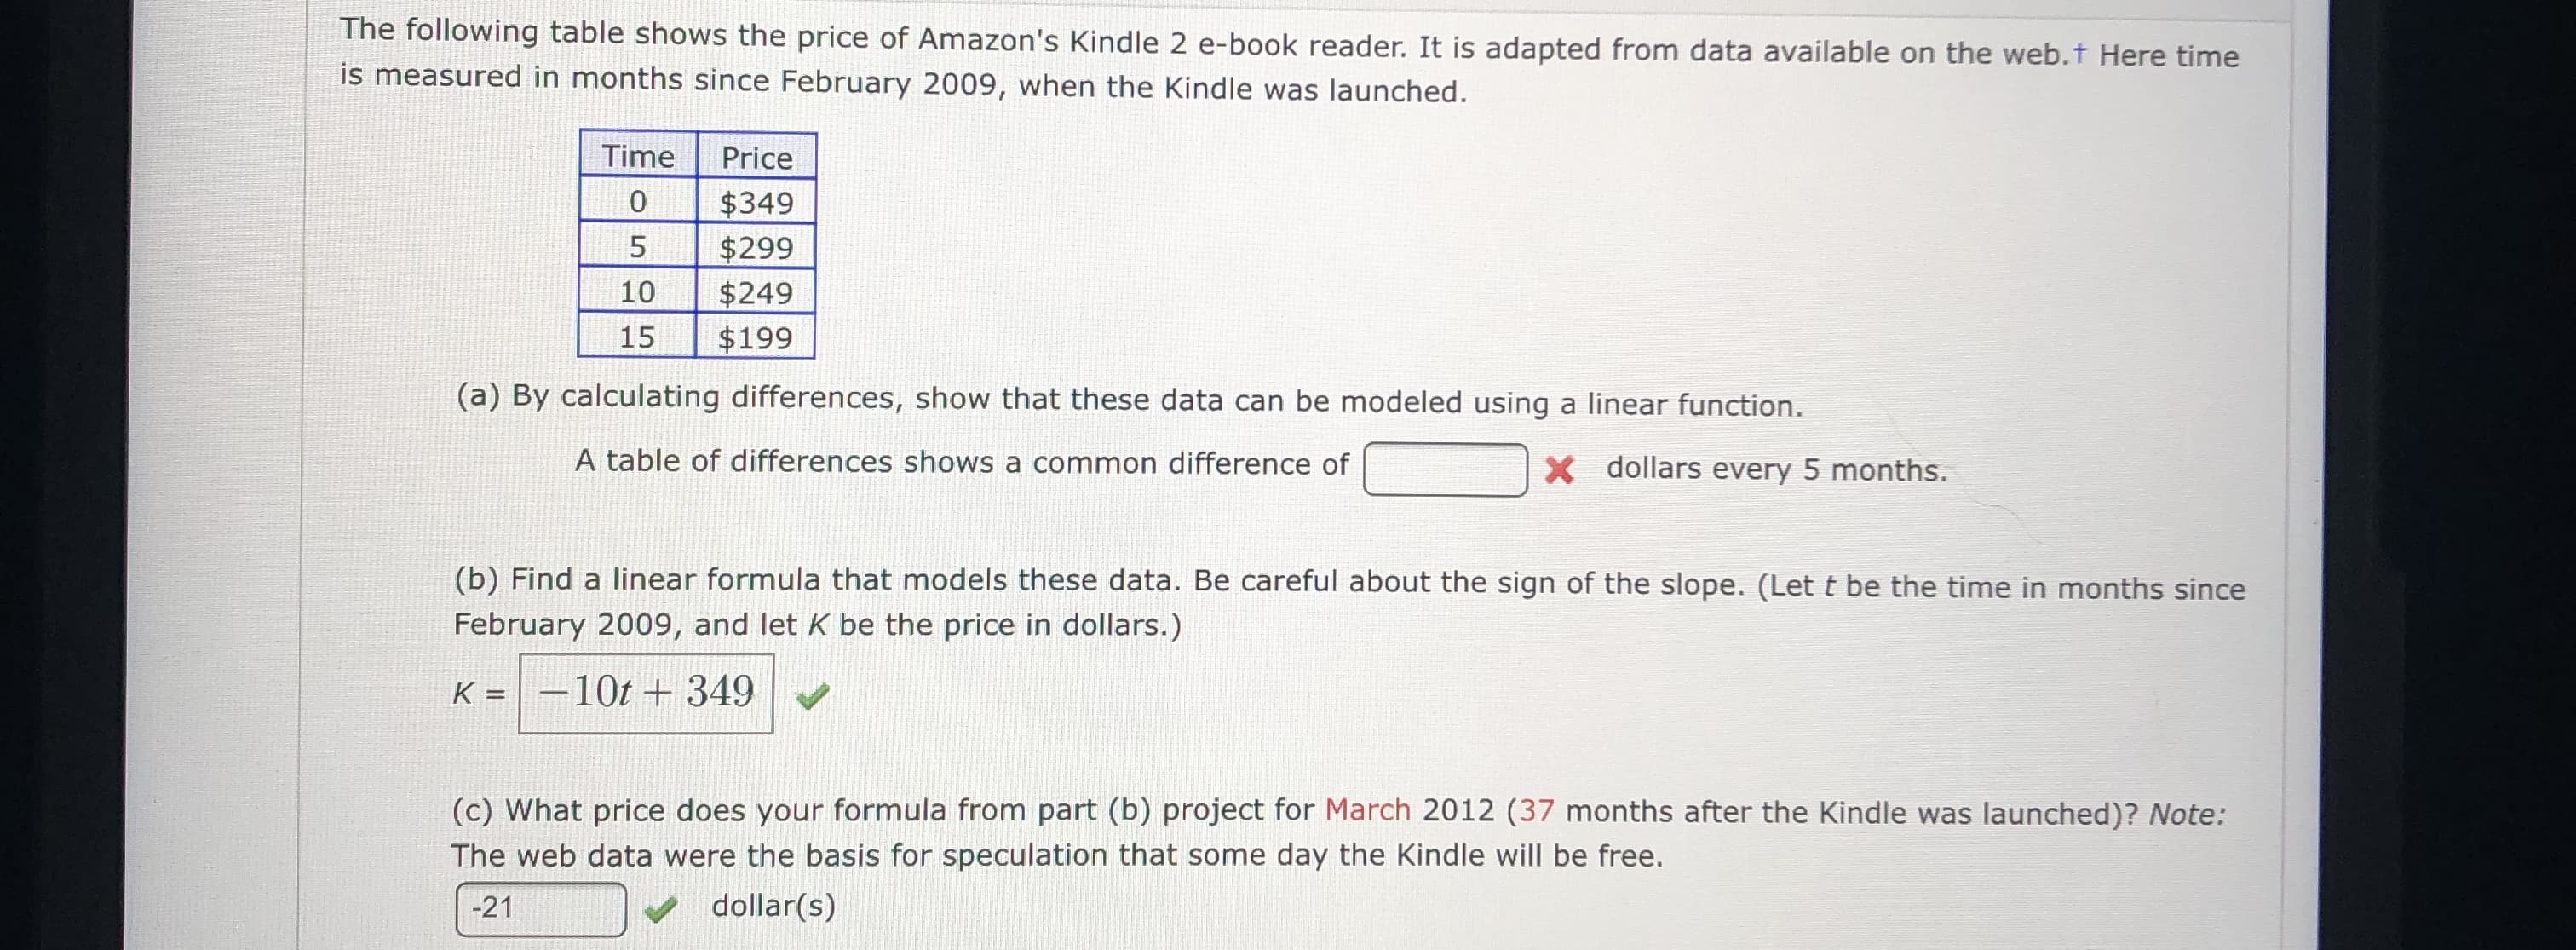 The following table shows the price of Amazon's Kindle 2 e-book reader. It is adapted from data available on the web.t Here time
is measured in months since February 2009, when the Kindle was launched.
Time
Price
0
$349
$299
$249
$199
5
10
15
(a) By calculating differences, show that these data can be modeled using a linear function.
A table of differences shows a common difference of
X dollars every 5 months.
(b) Find a linear formula that models these data. Be careful about the sign of the slope. (Let t be the time in months since
February 2009, and let K be the price in dollars.)
-10t +349
K =
(c) What price does your formula from part (b) project for March 2012 (37 months after the Kindle was launched)? Mote:
The web data were the basis for speculation that some day the Kindle will be free.
dollar(s)
-21
